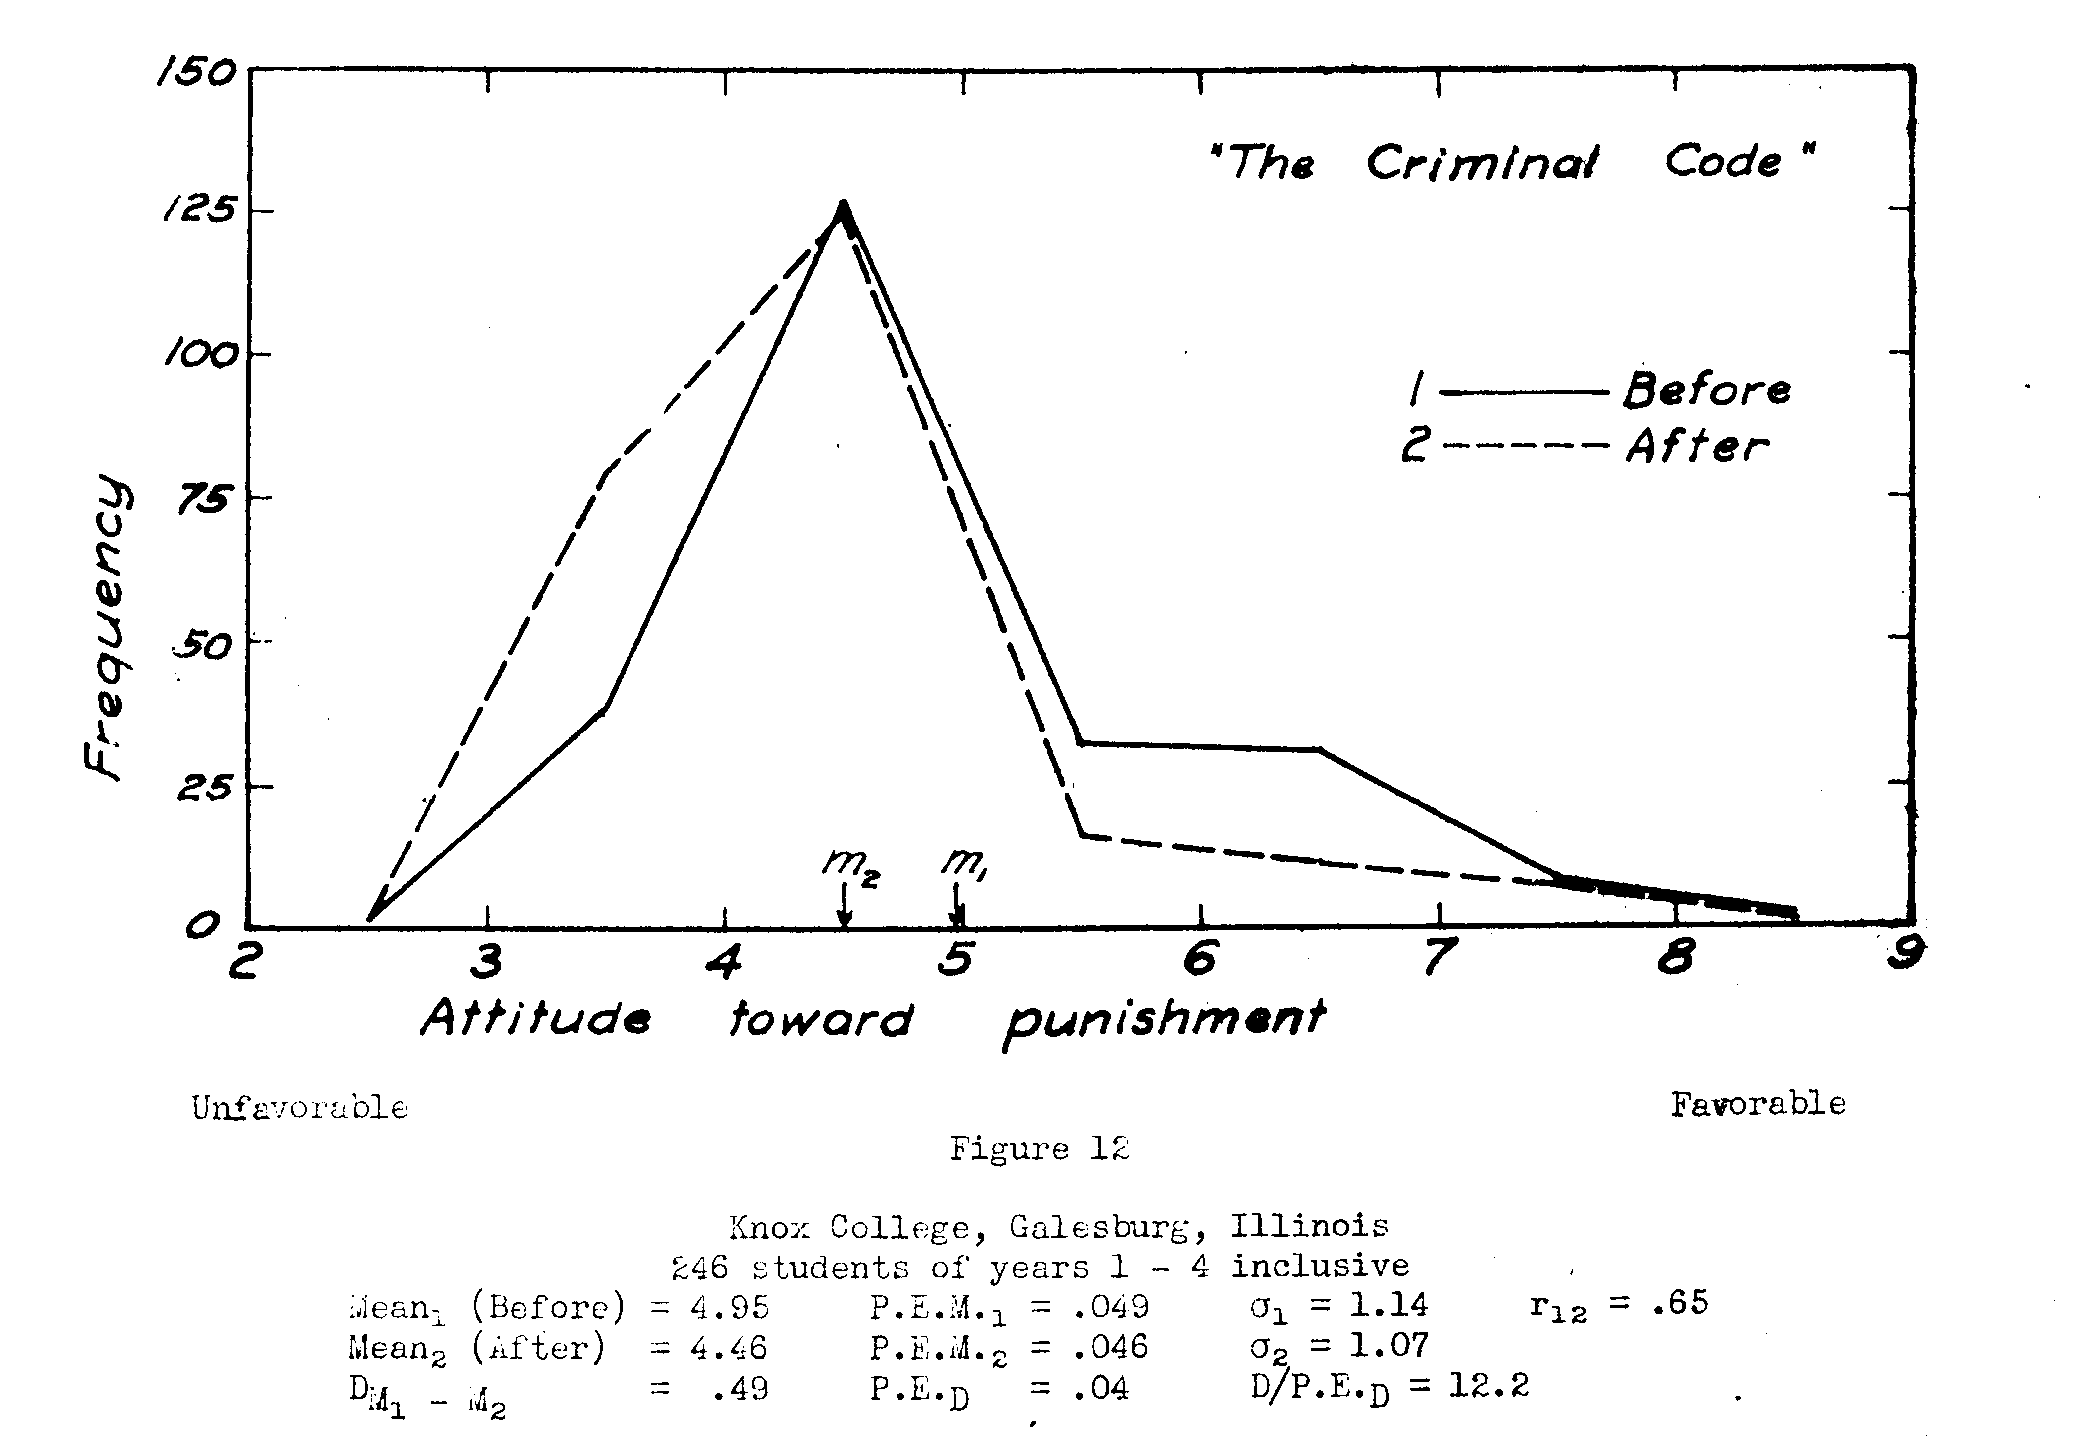 Figure 12, Attitude toward punisment, before and after THE CRIMINAL CODE